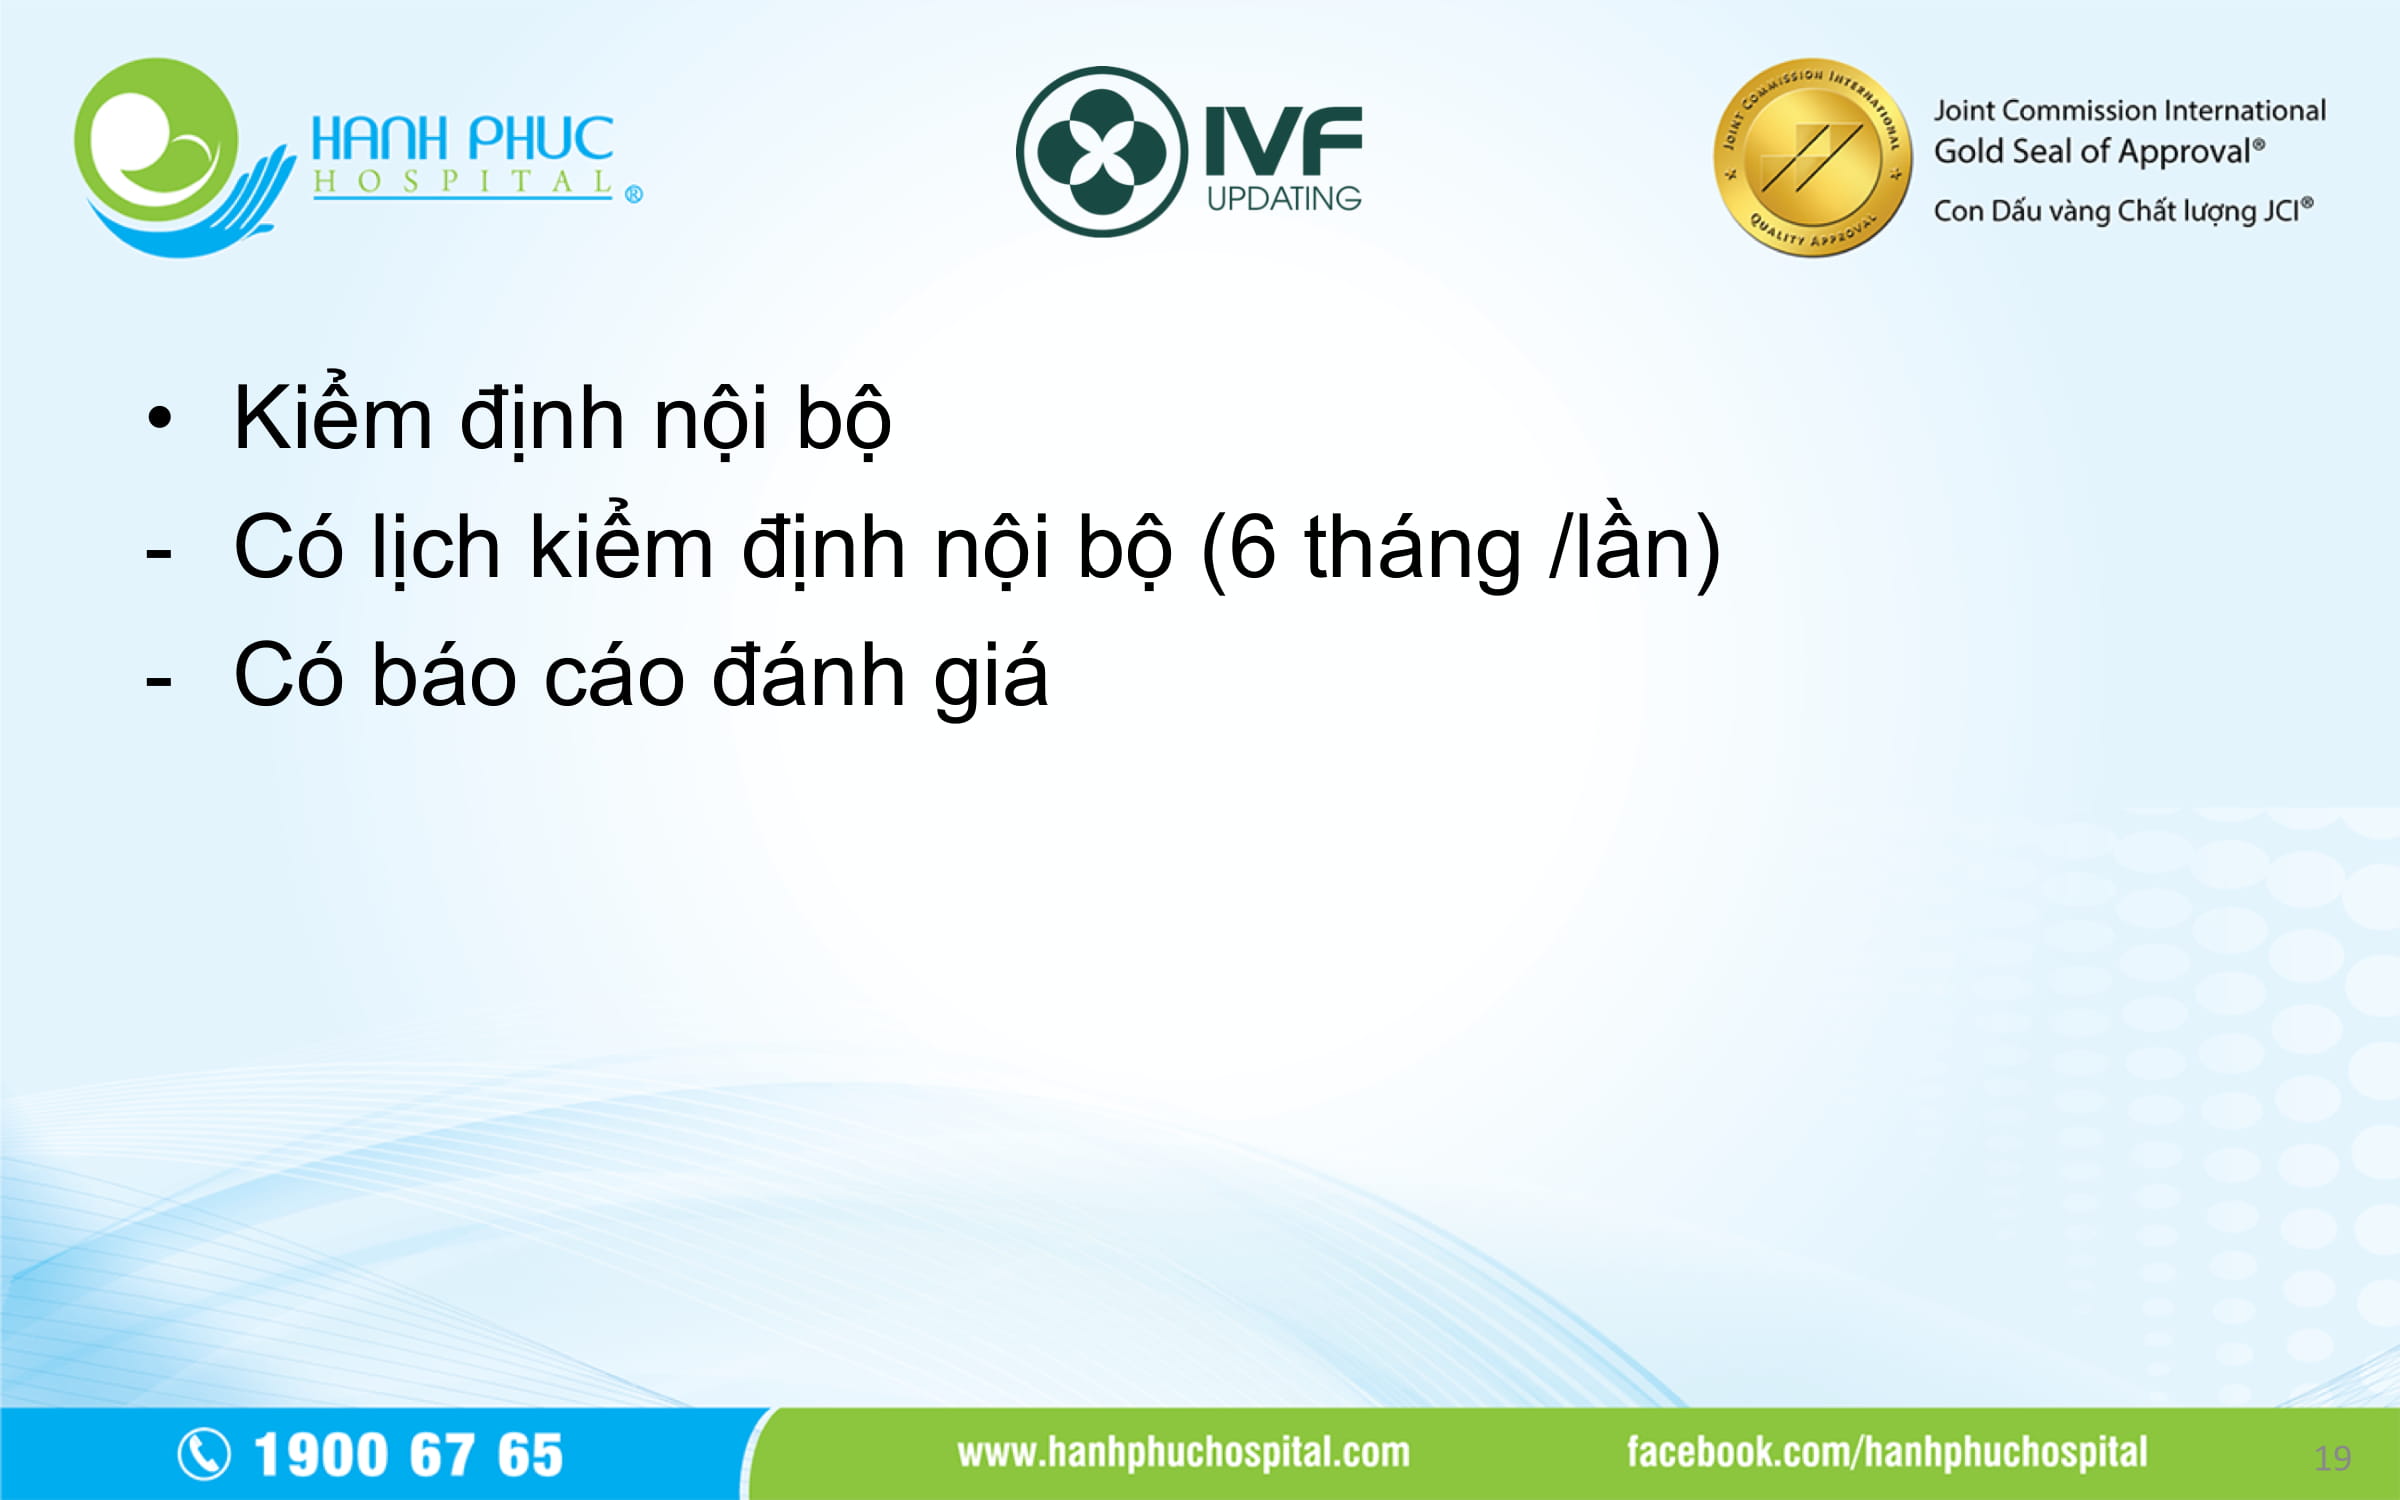 BS Vo Thien An Report_IVF UPDATING 5-19